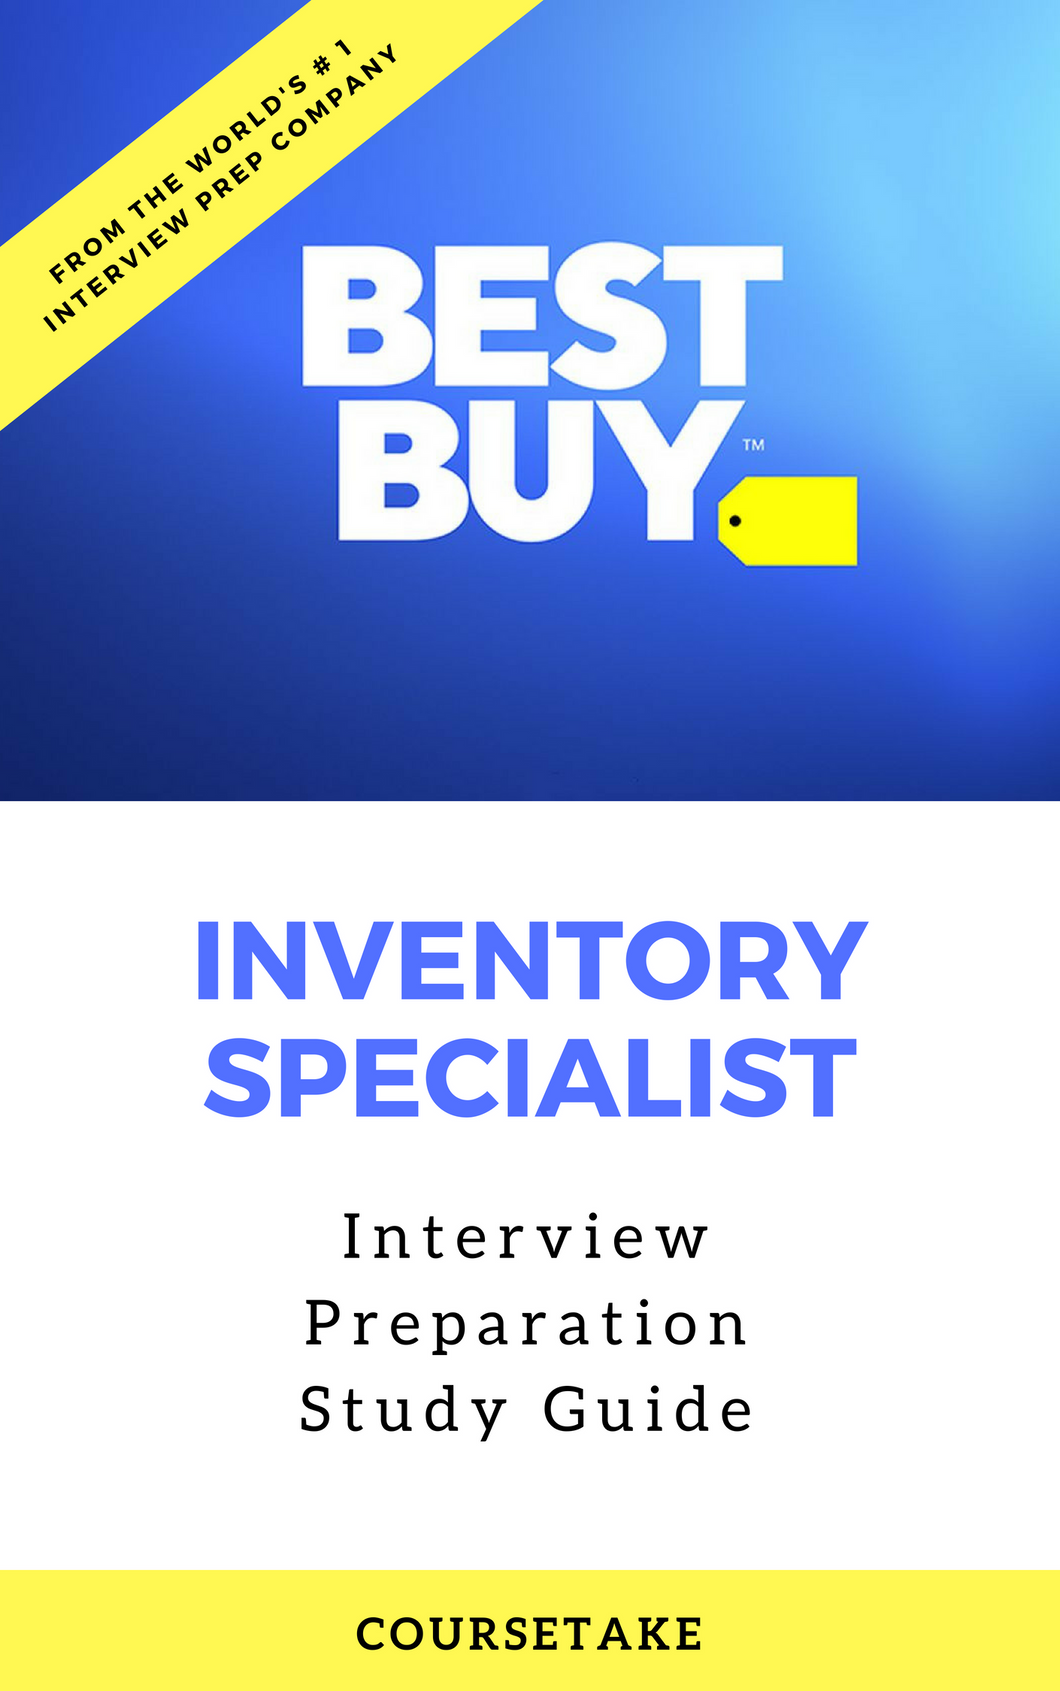 Best Buy Inventory Specialist Interview Preparation Study Guide